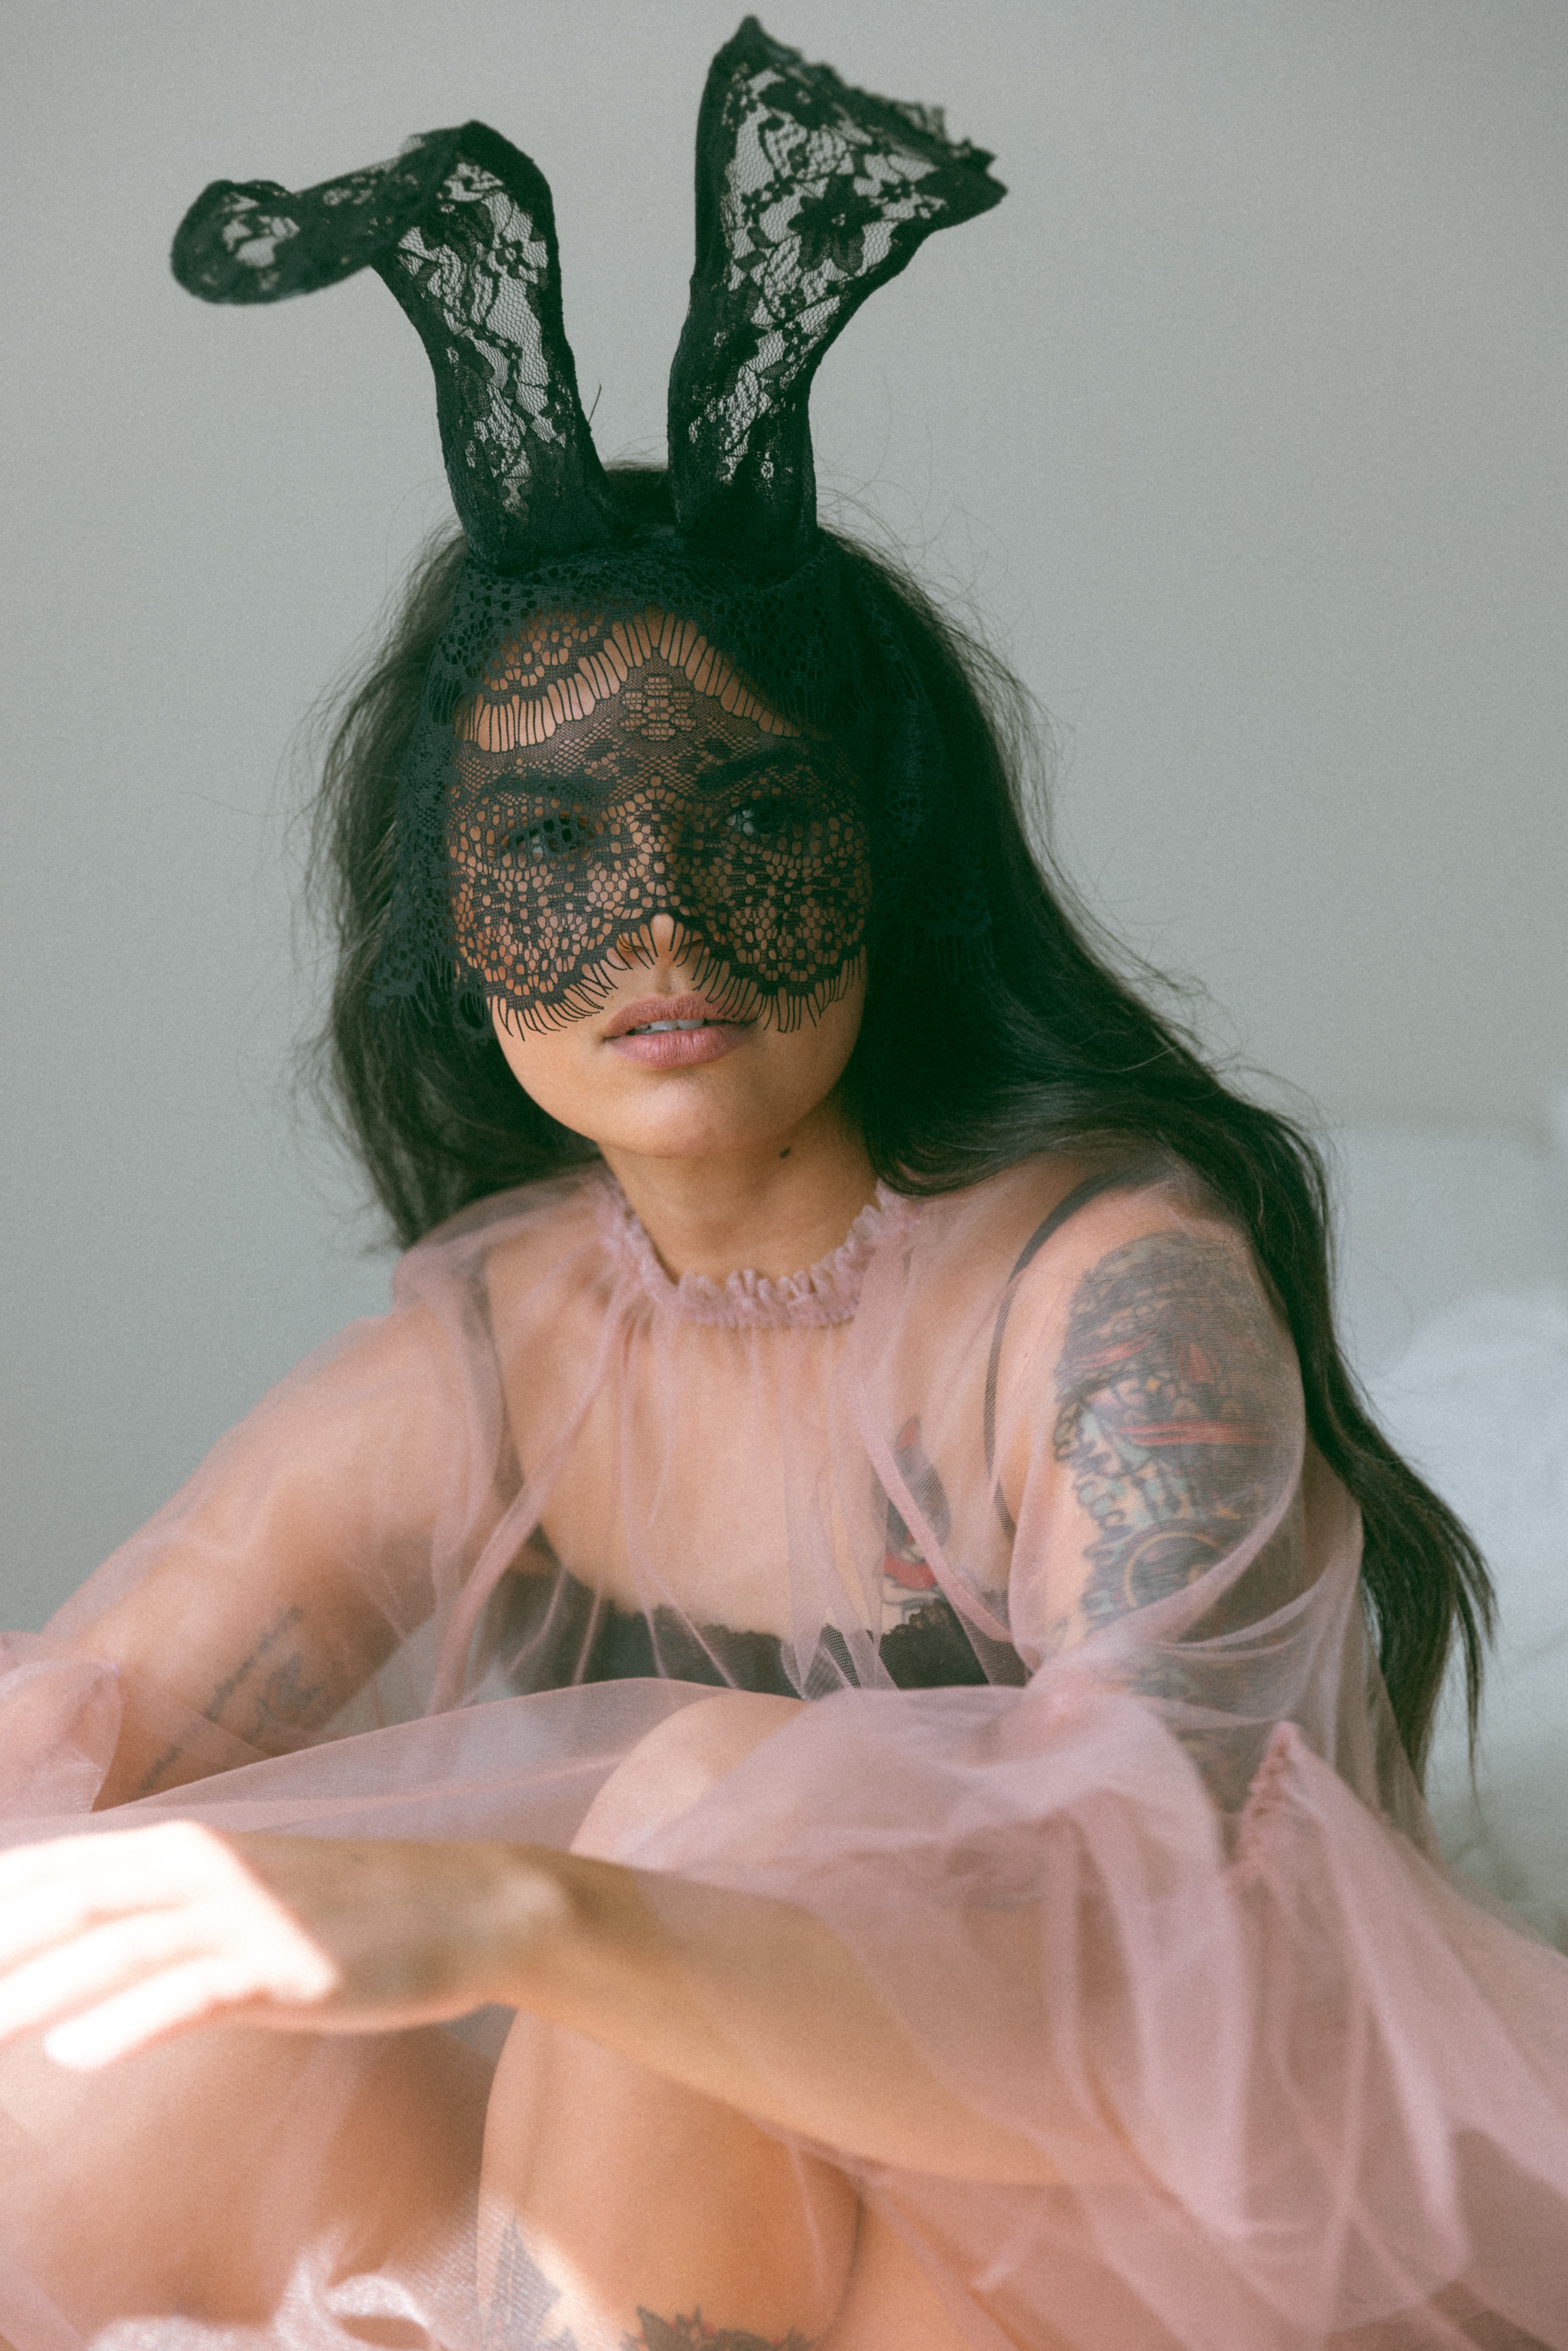 a masked woman wearing a sheer outfit during a boudoir photoshoot 